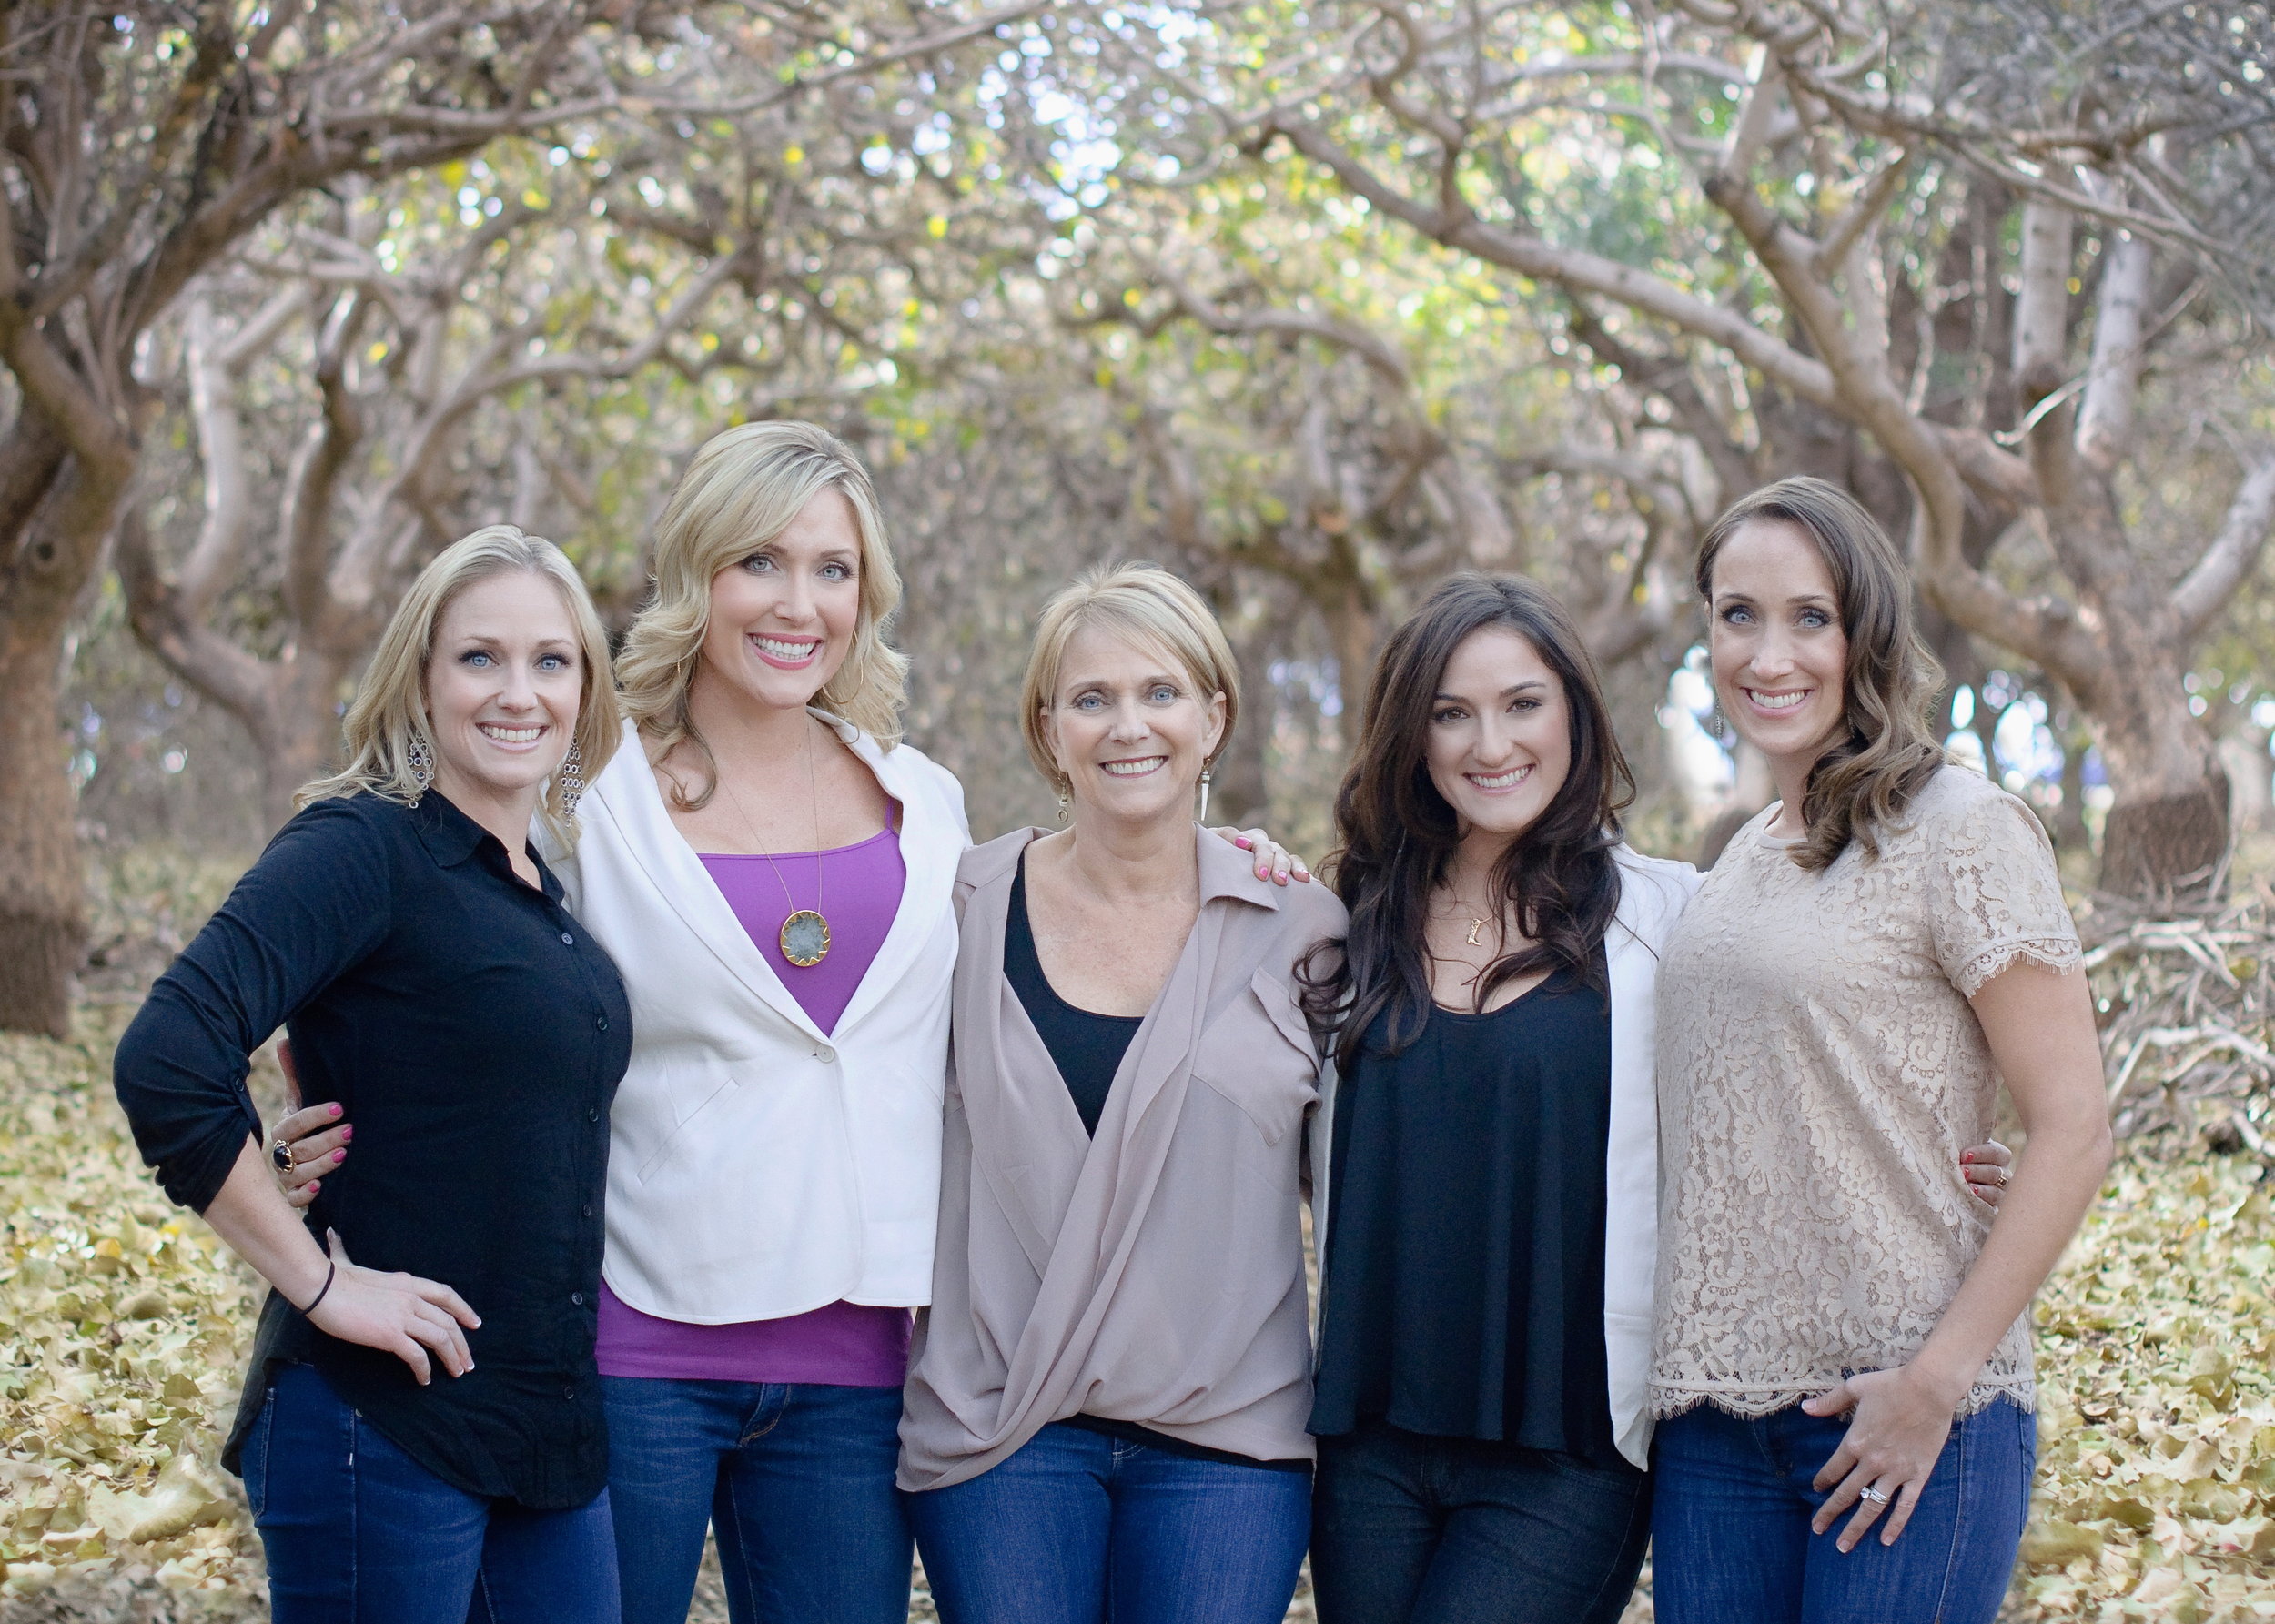 Nicole with her three sisters and mother, Colleen, who passed away in 2013 after a 5-year battle with ovarian cancer.&nbsp;